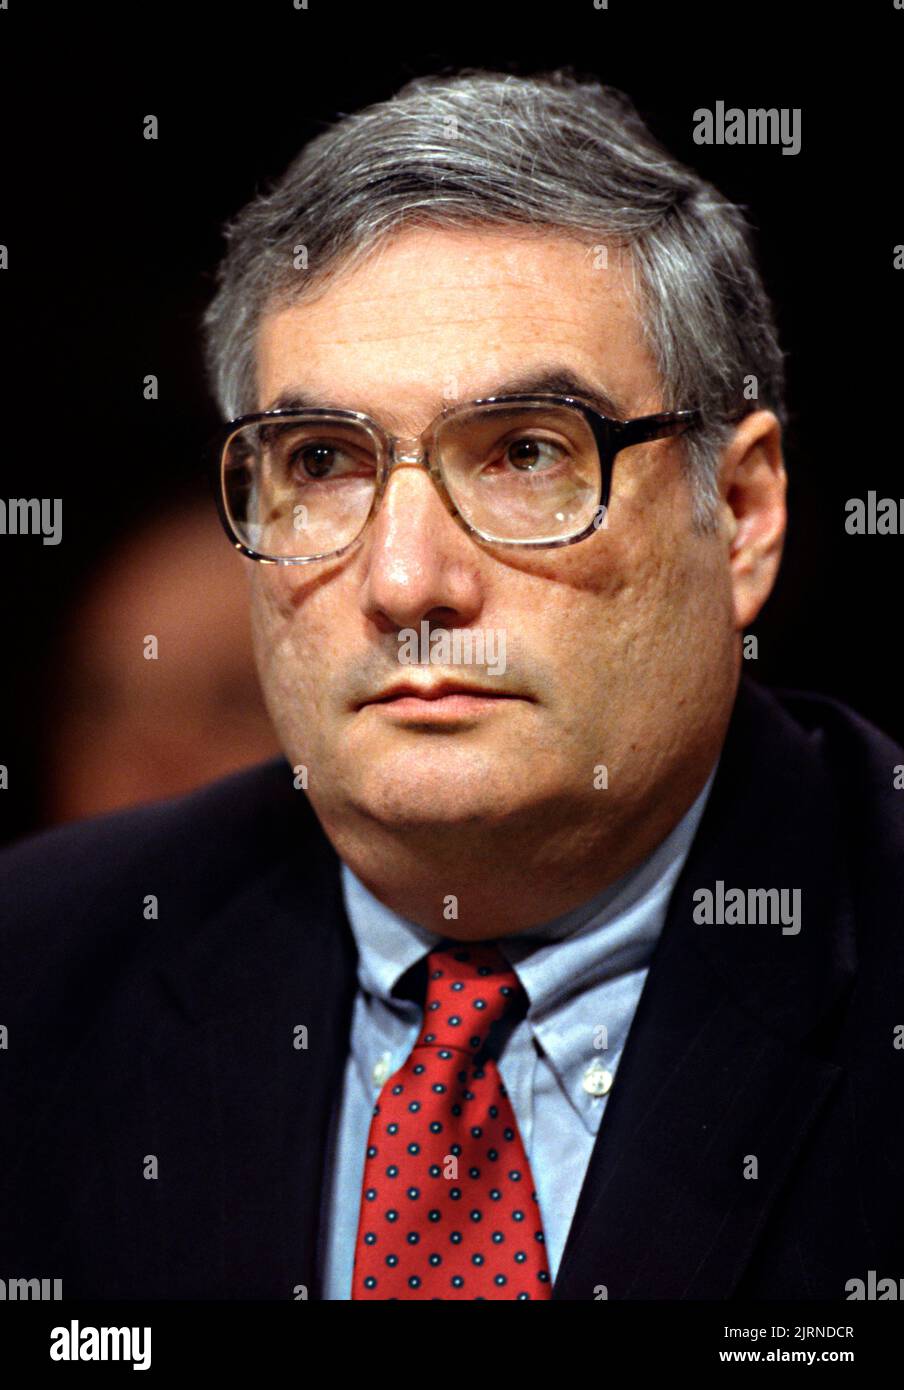 Meyer Koplow, attorney representing the tobacco industry testifies at the Senate Judiciary hearing on Capitol Hill, June 26, 1997 in Washington, D.C.  The tobacco companies settled a lawsuit with the states valued at $246 billion. Stock Photo